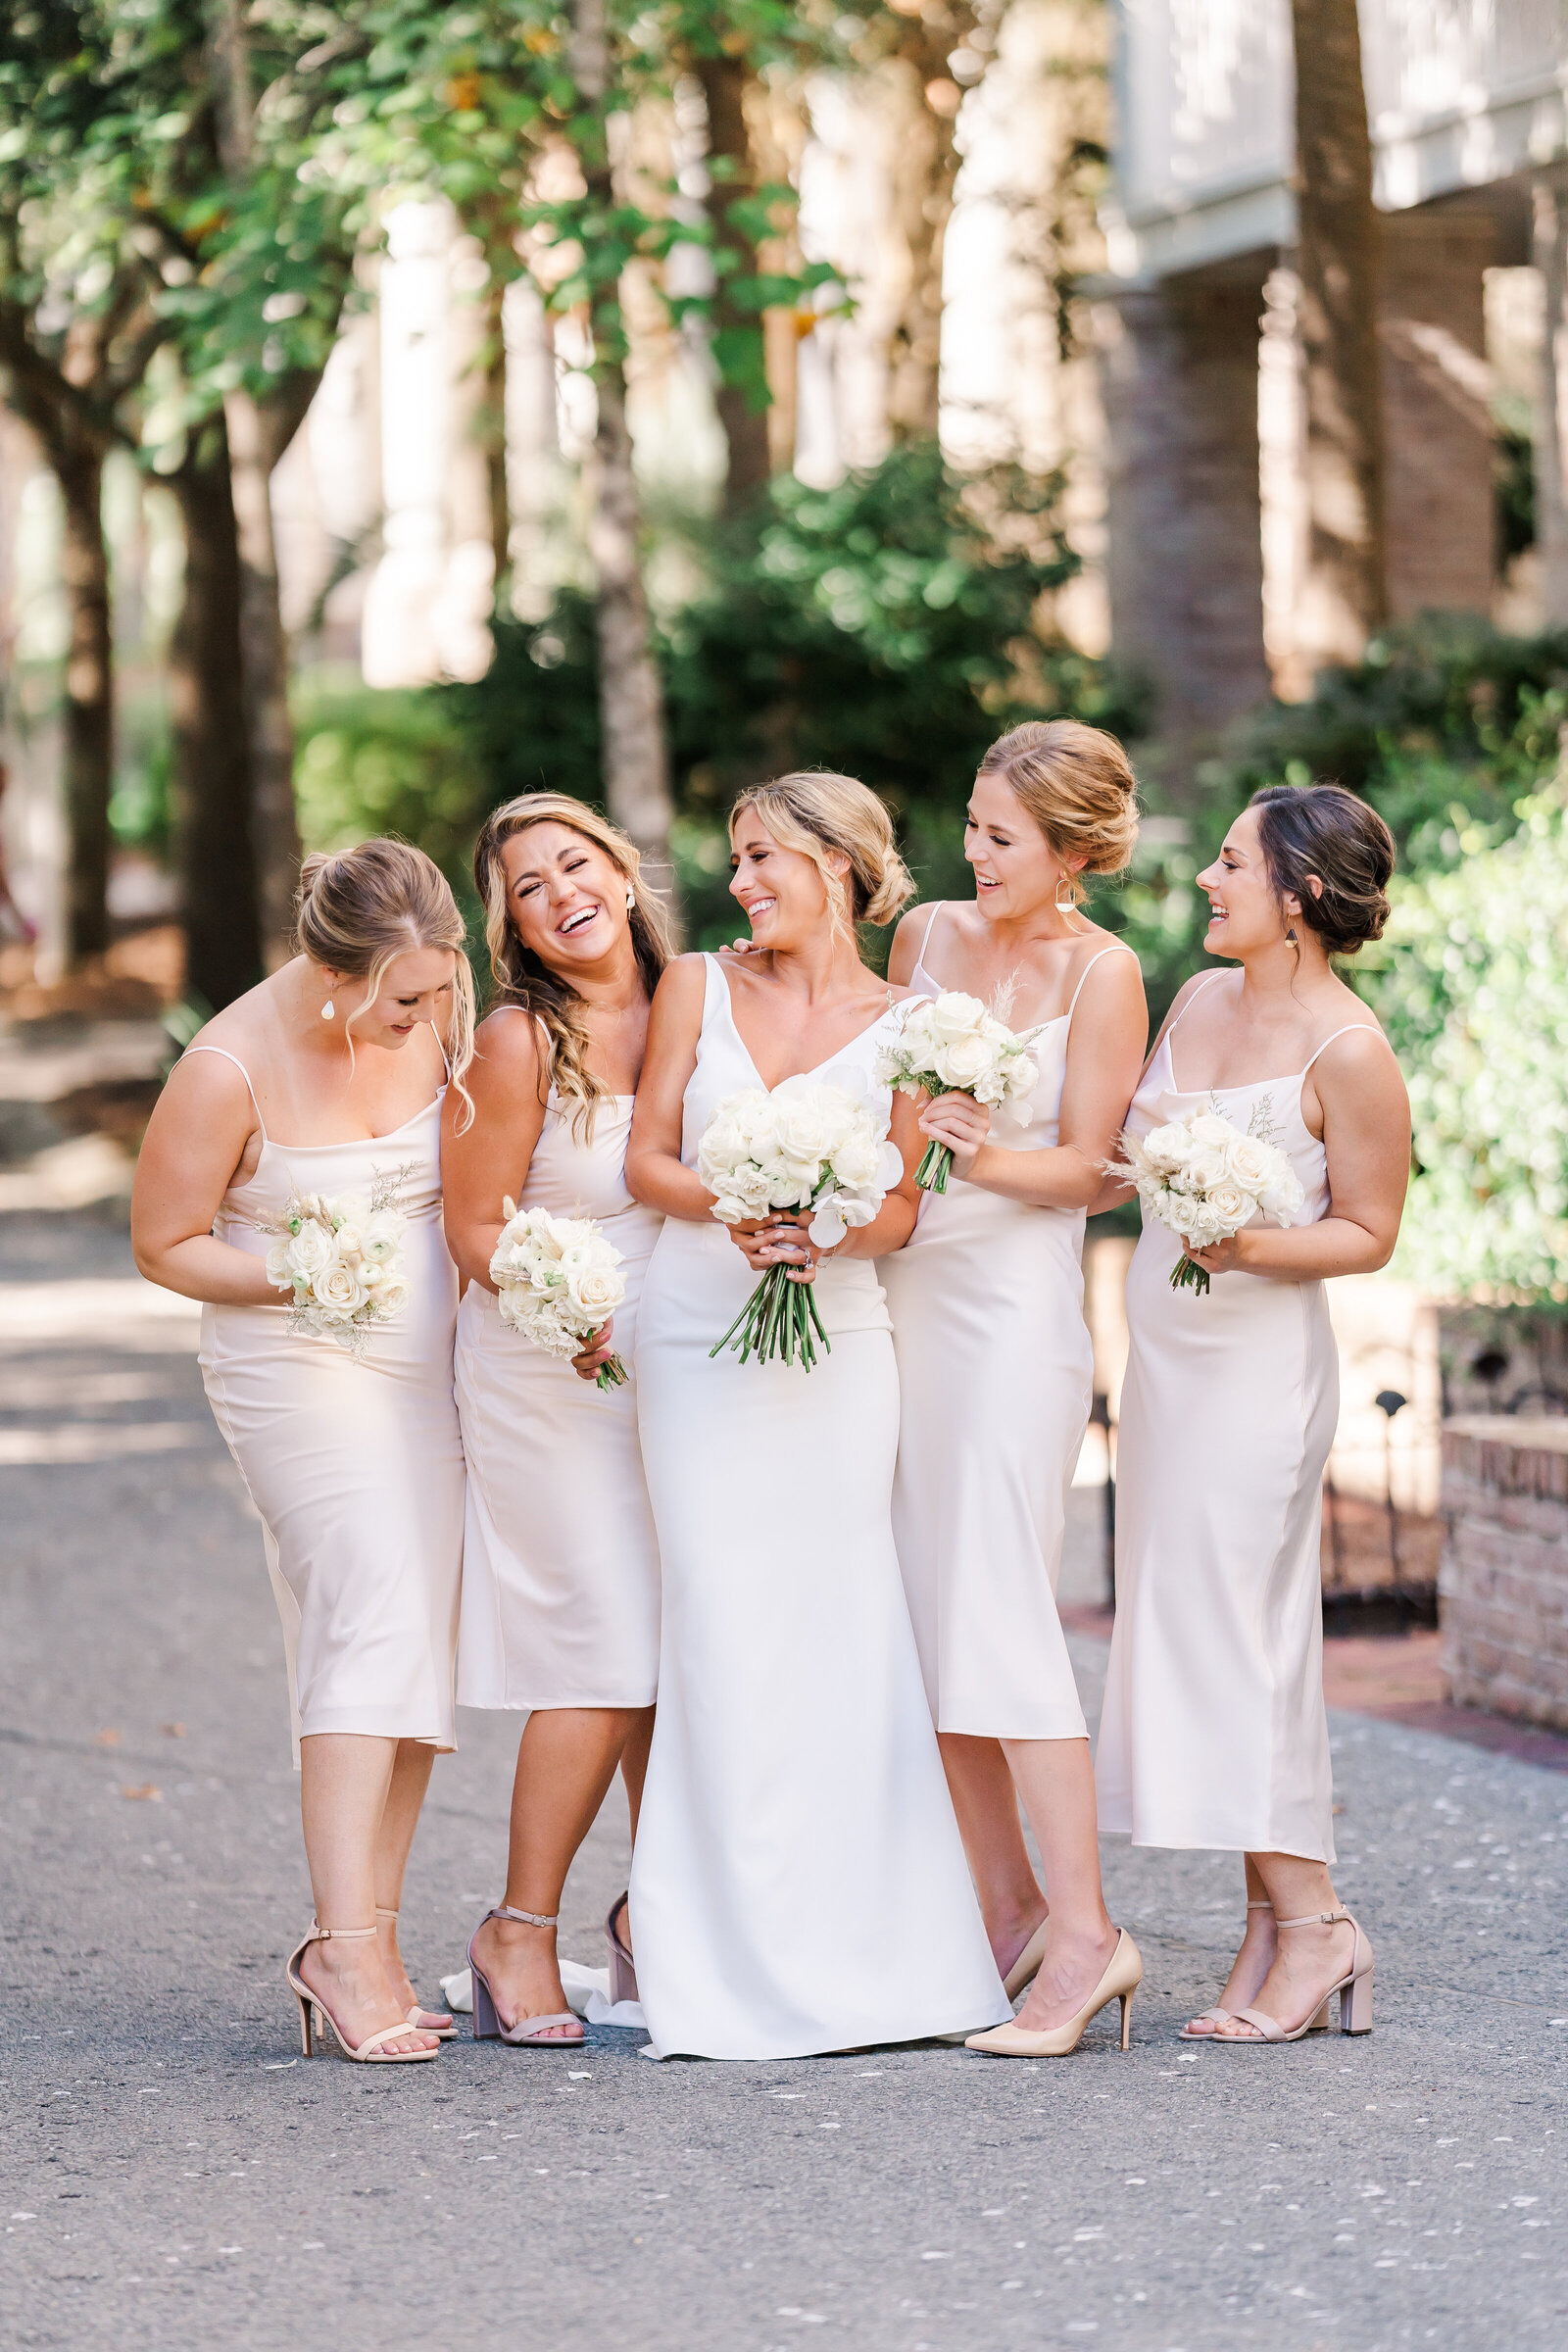 Bride and her bridesmaids laughing together in street